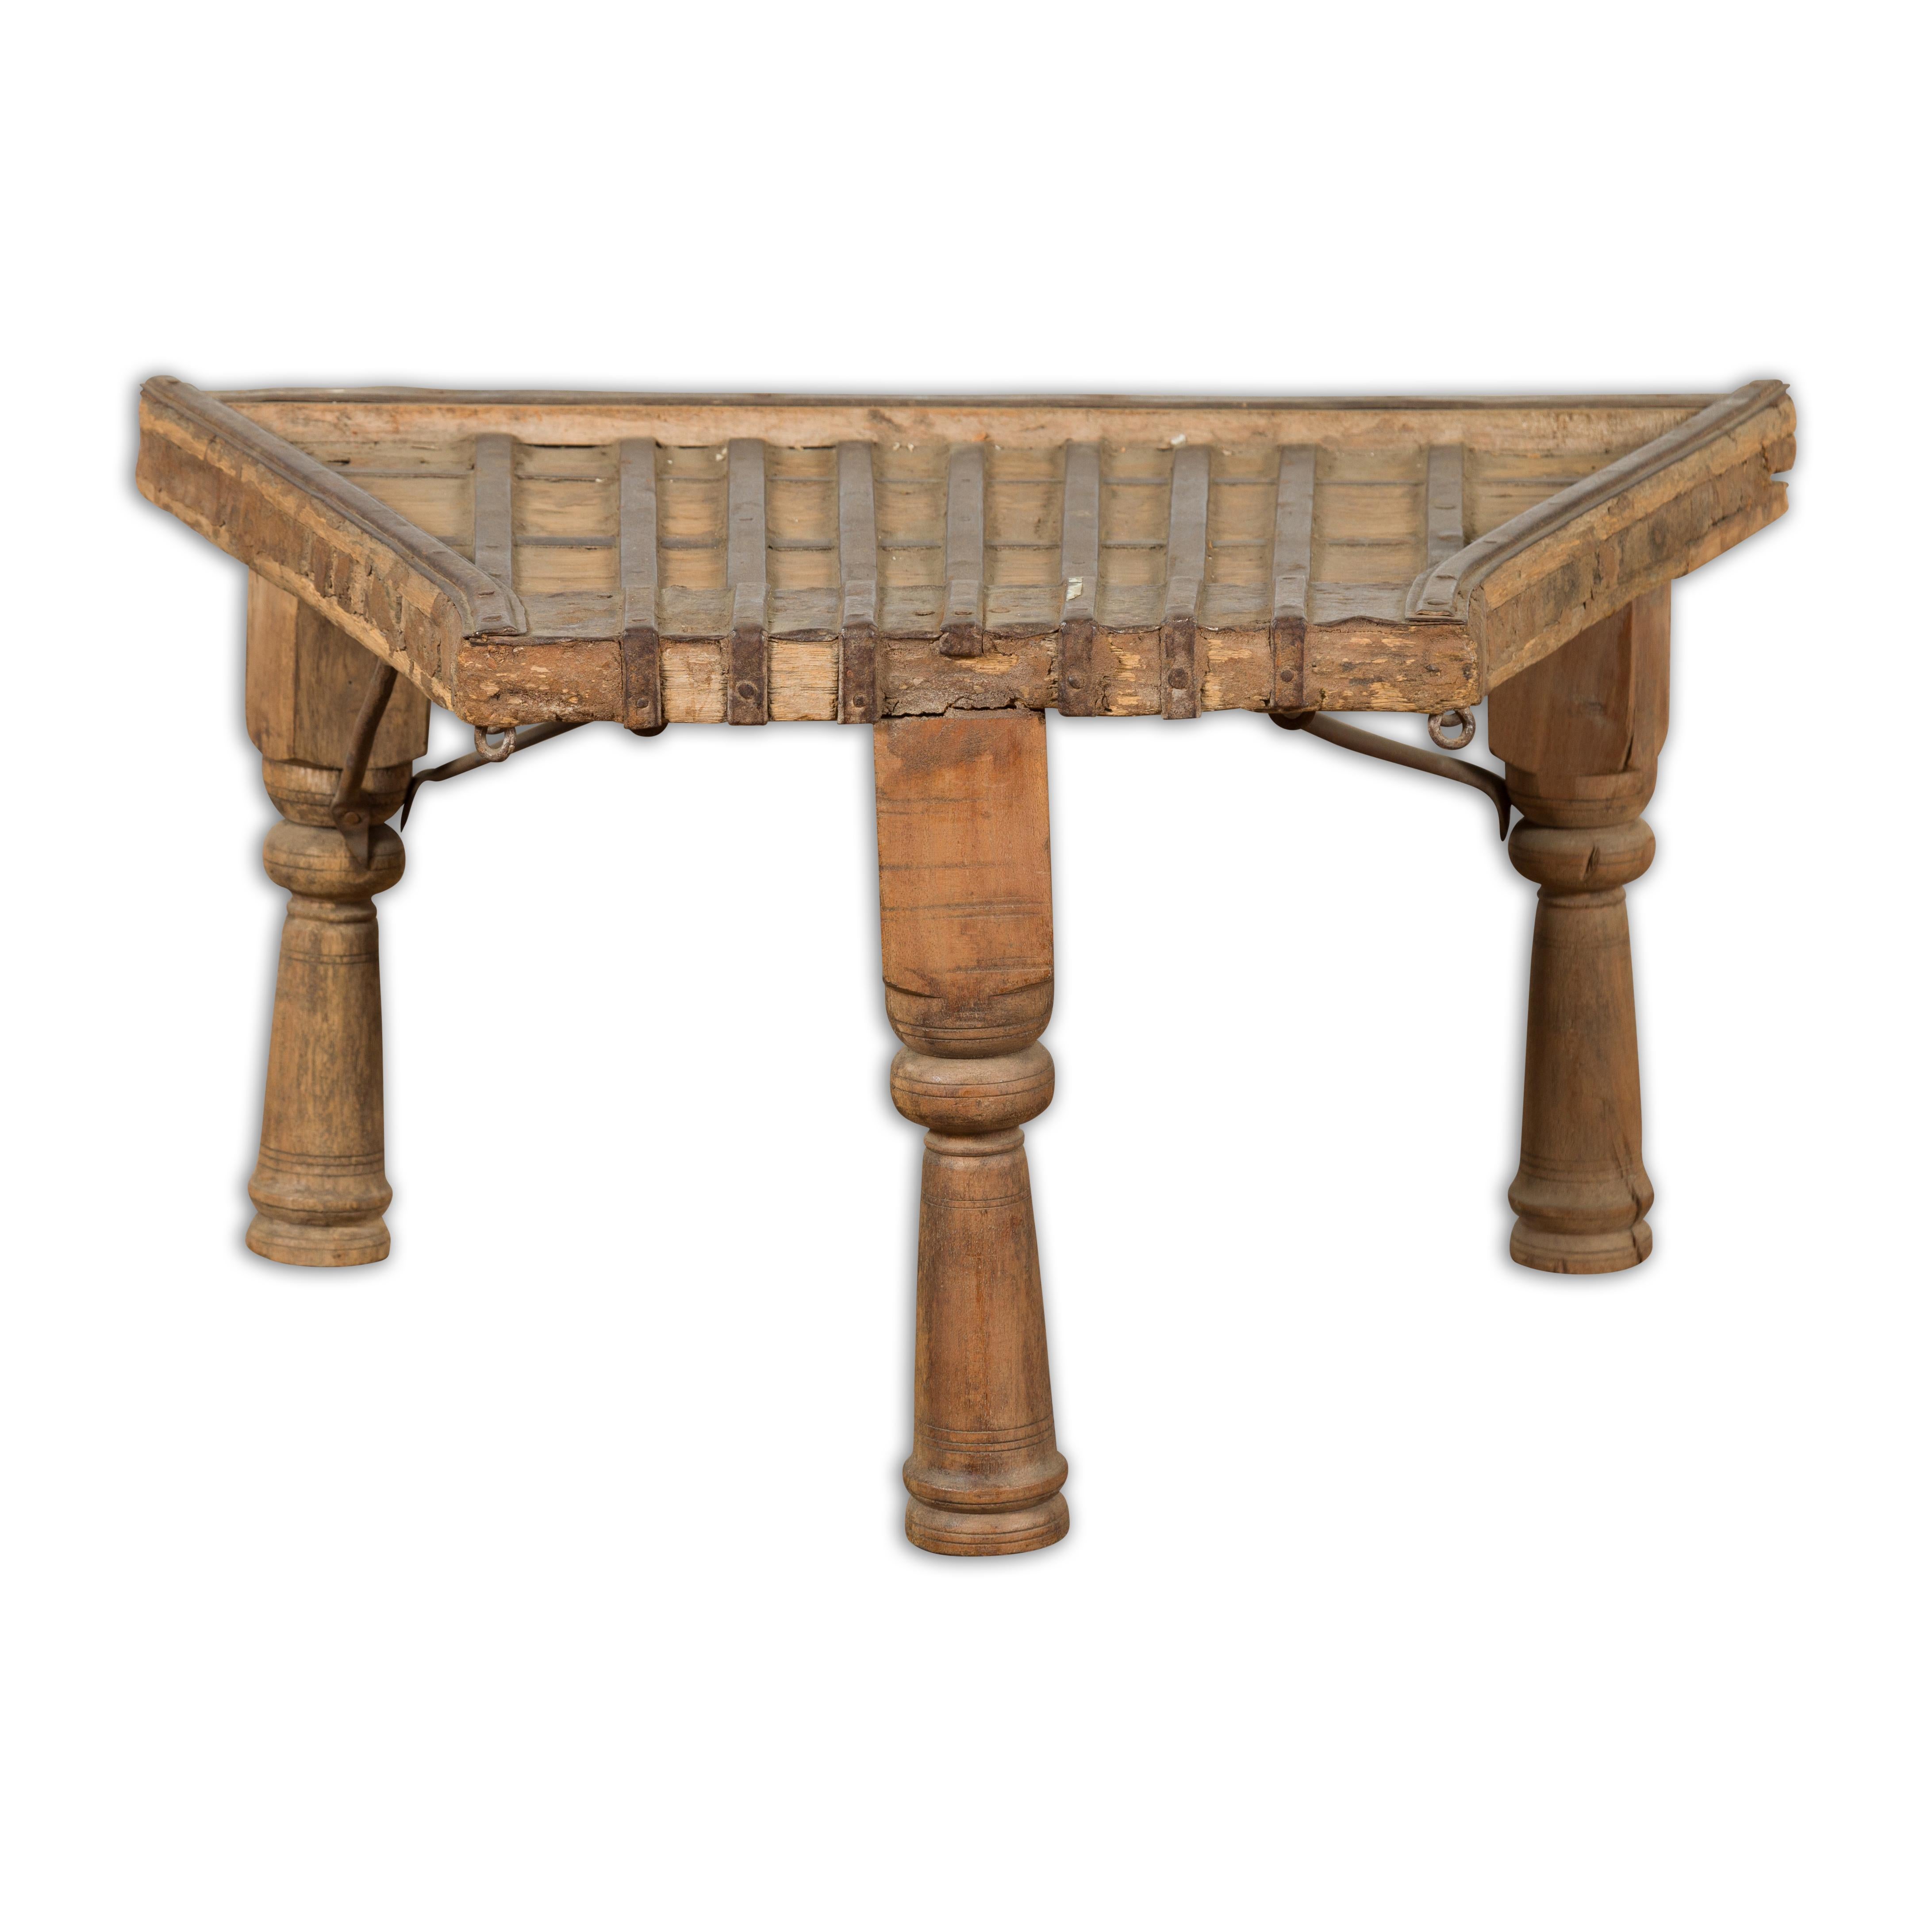 Indian 19th Century Wood Bullock Cart Made into a Coffee Table with Iron Details For Sale 10